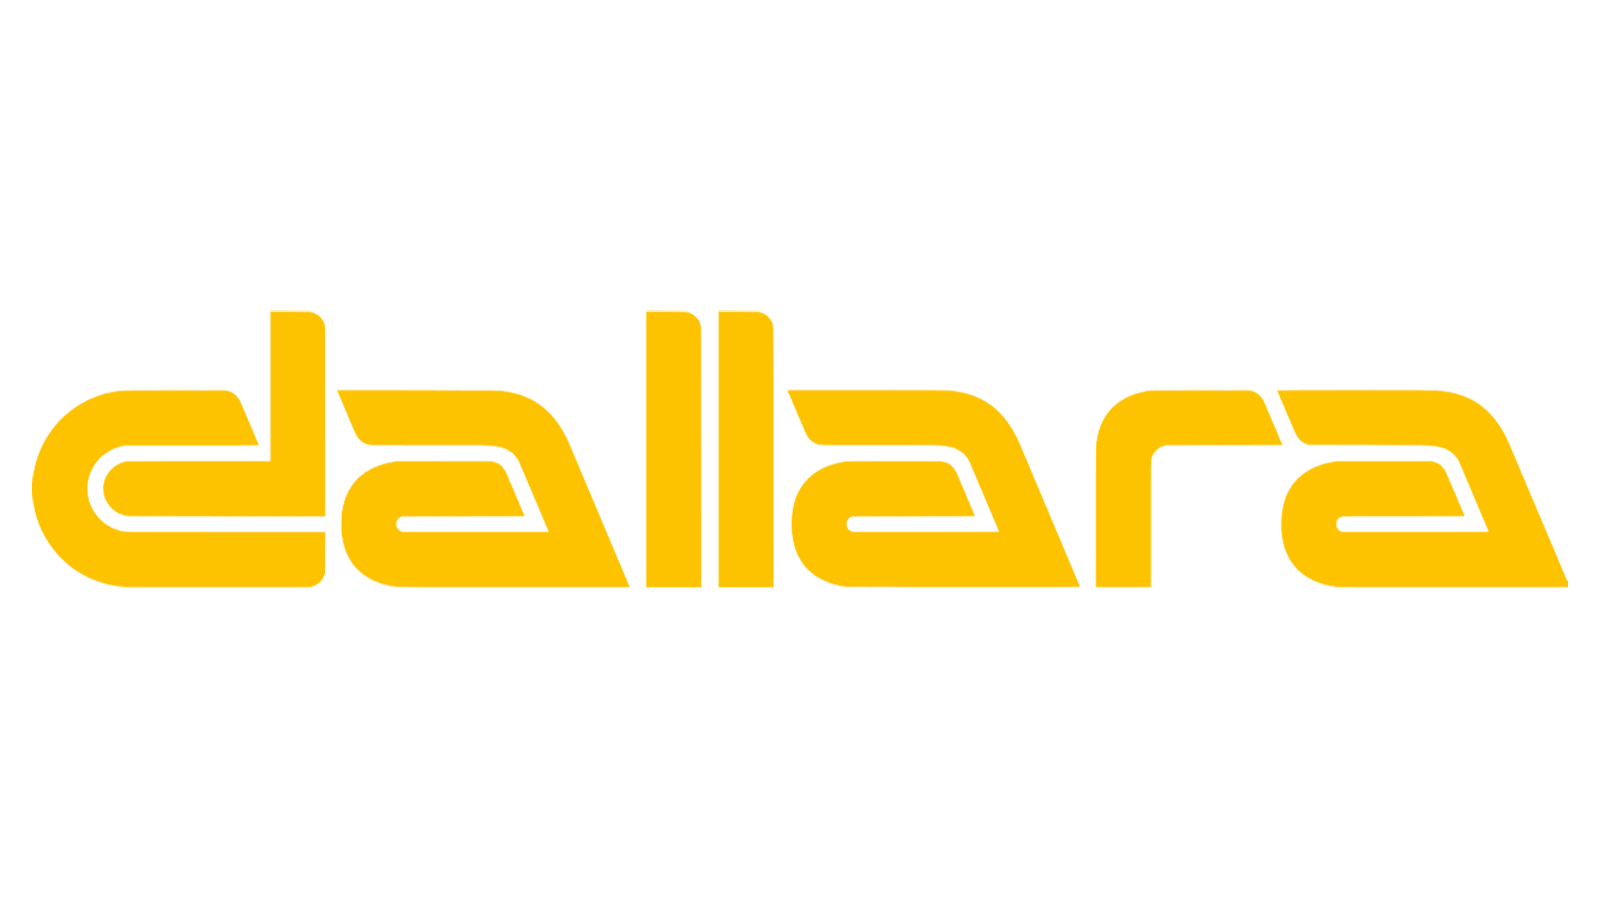 Dallara developing Additive Manufactured Heat Exchangers in partnership with Conflux Technology